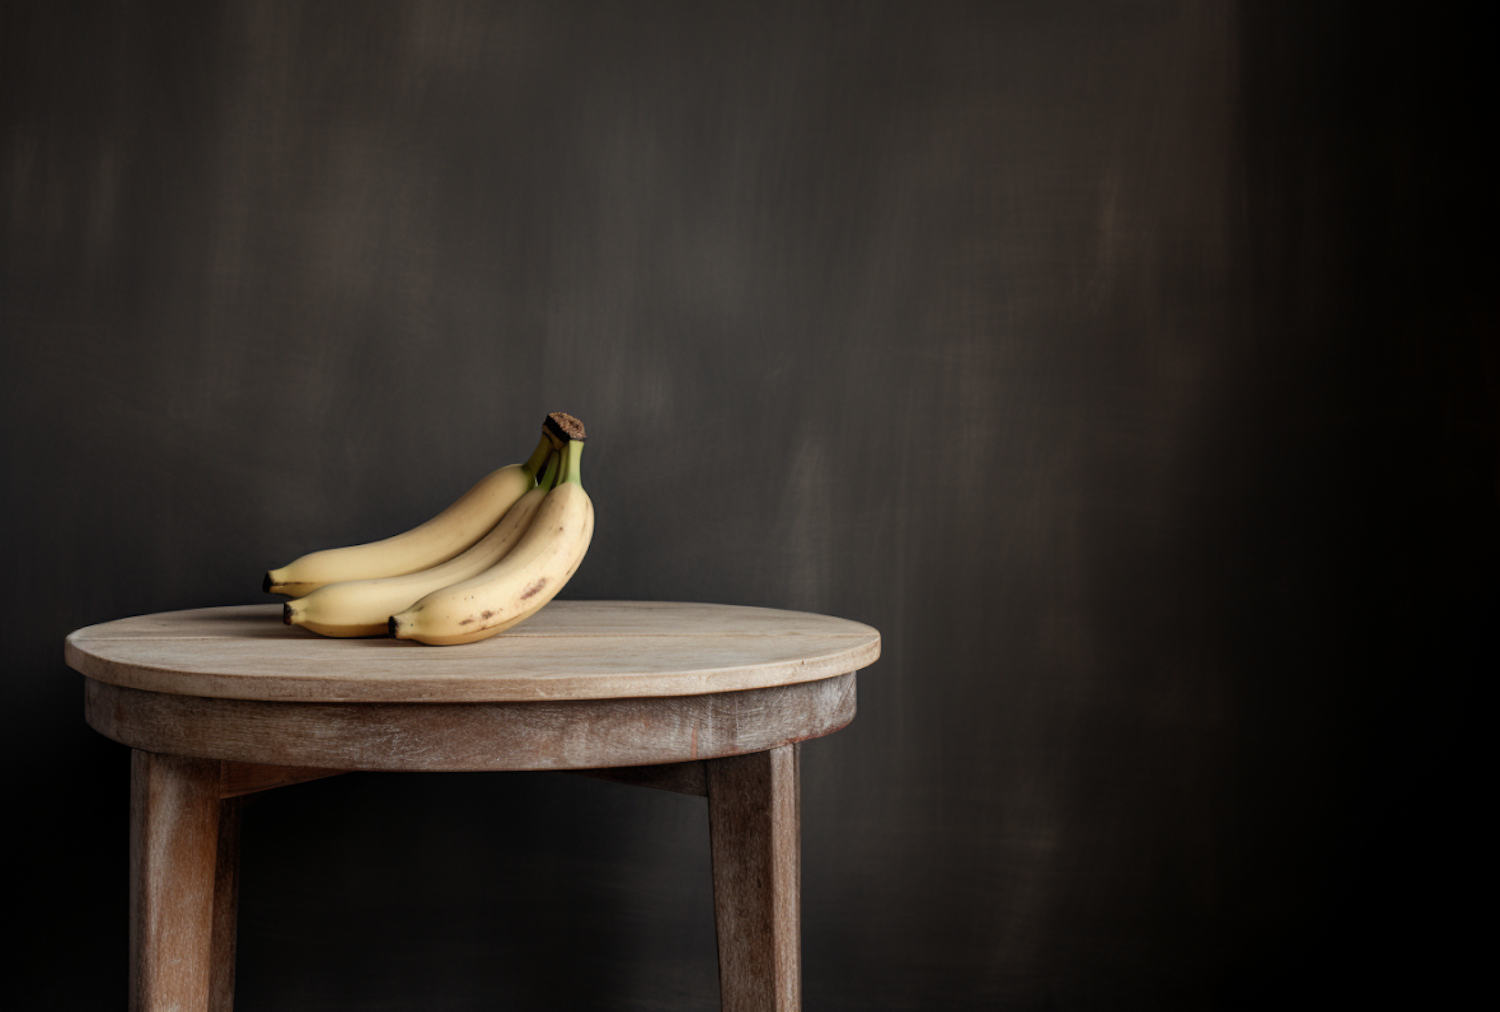 Ripe Tranquility: Bananas on Wooden Elegance